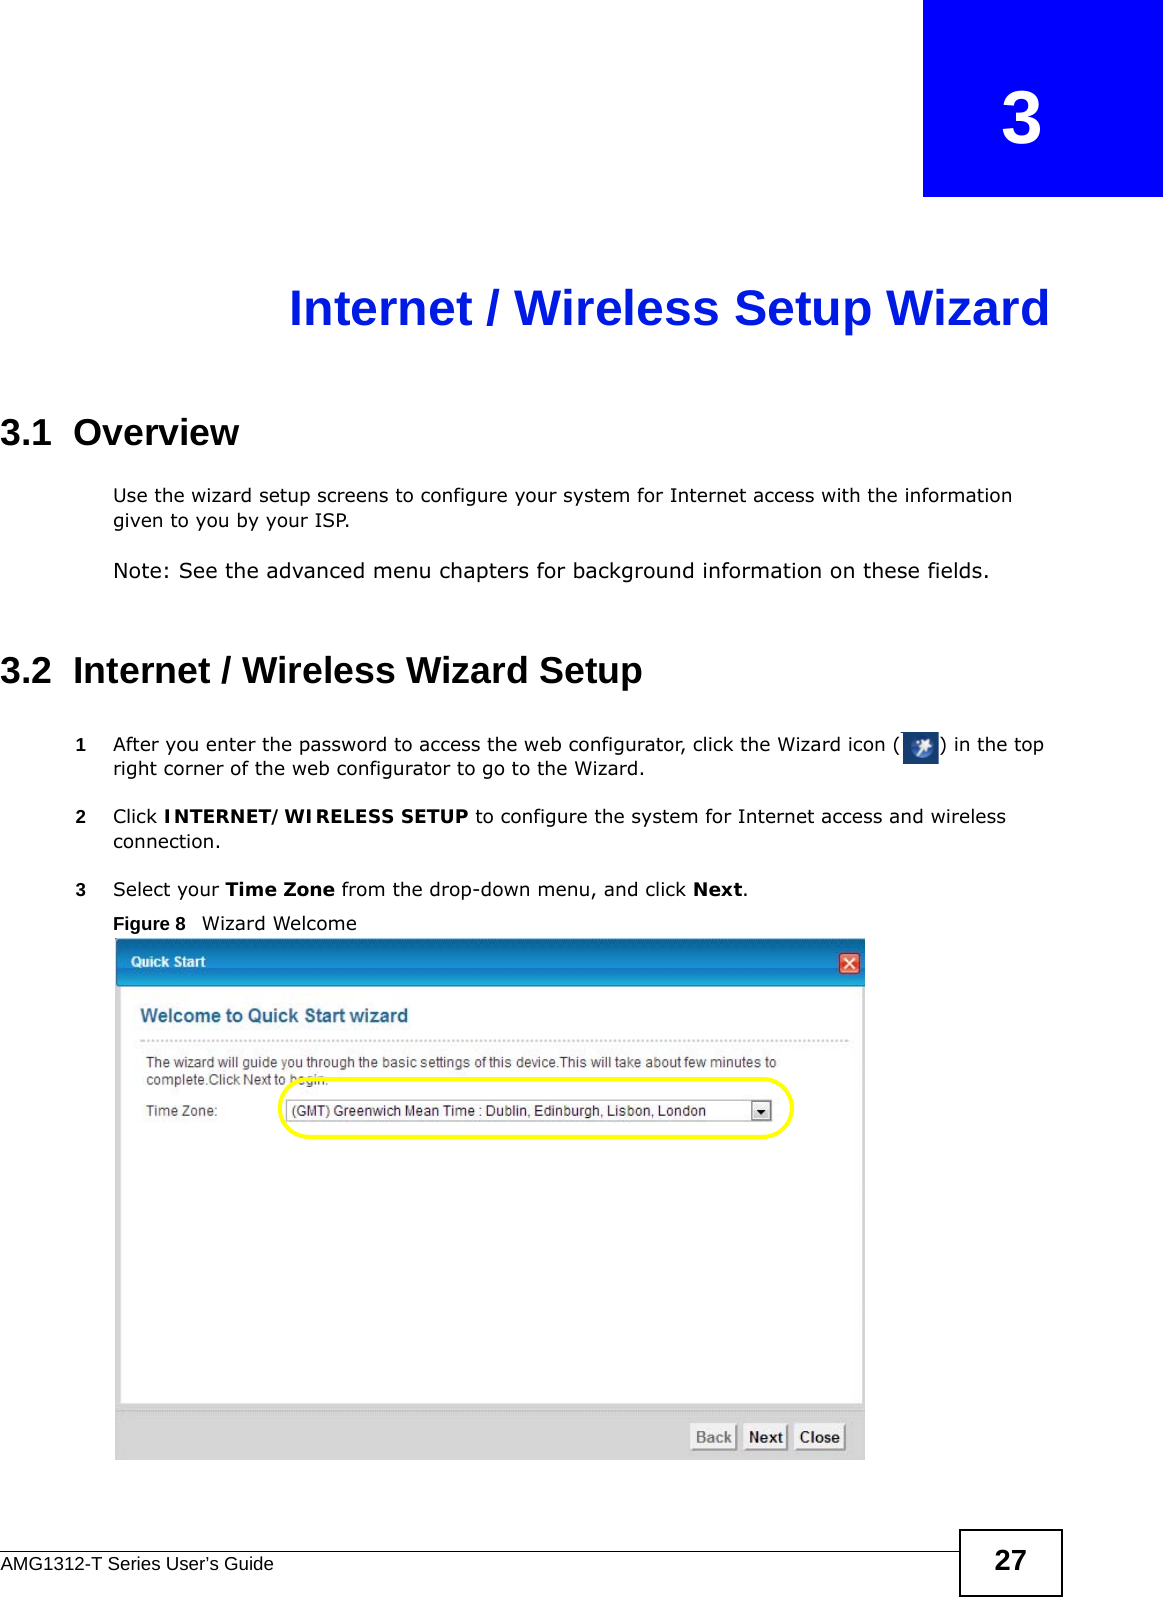 AMG1312-T Series User’s Guide 27CHAPTER   3Internet / Wireless Setup Wizard3.1  OverviewUse the wizard setup screens to configure your system for Internet access with the information given to you by your ISP. Note: See the advanced menu chapters for background information on these fields.3.2  Internet / Wireless Wizard Setup1After you enter the password to access the web configurator, click the Wizard icon ( ) in the top right corner of the web configurator to go to the Wizard. 2Click INTERNET/WIRELESS SETUP to configure the system for Internet access and wireless connection.3Select your Time Zone from the drop-down menu, and click Next.Figure 8   Wizard Welcome